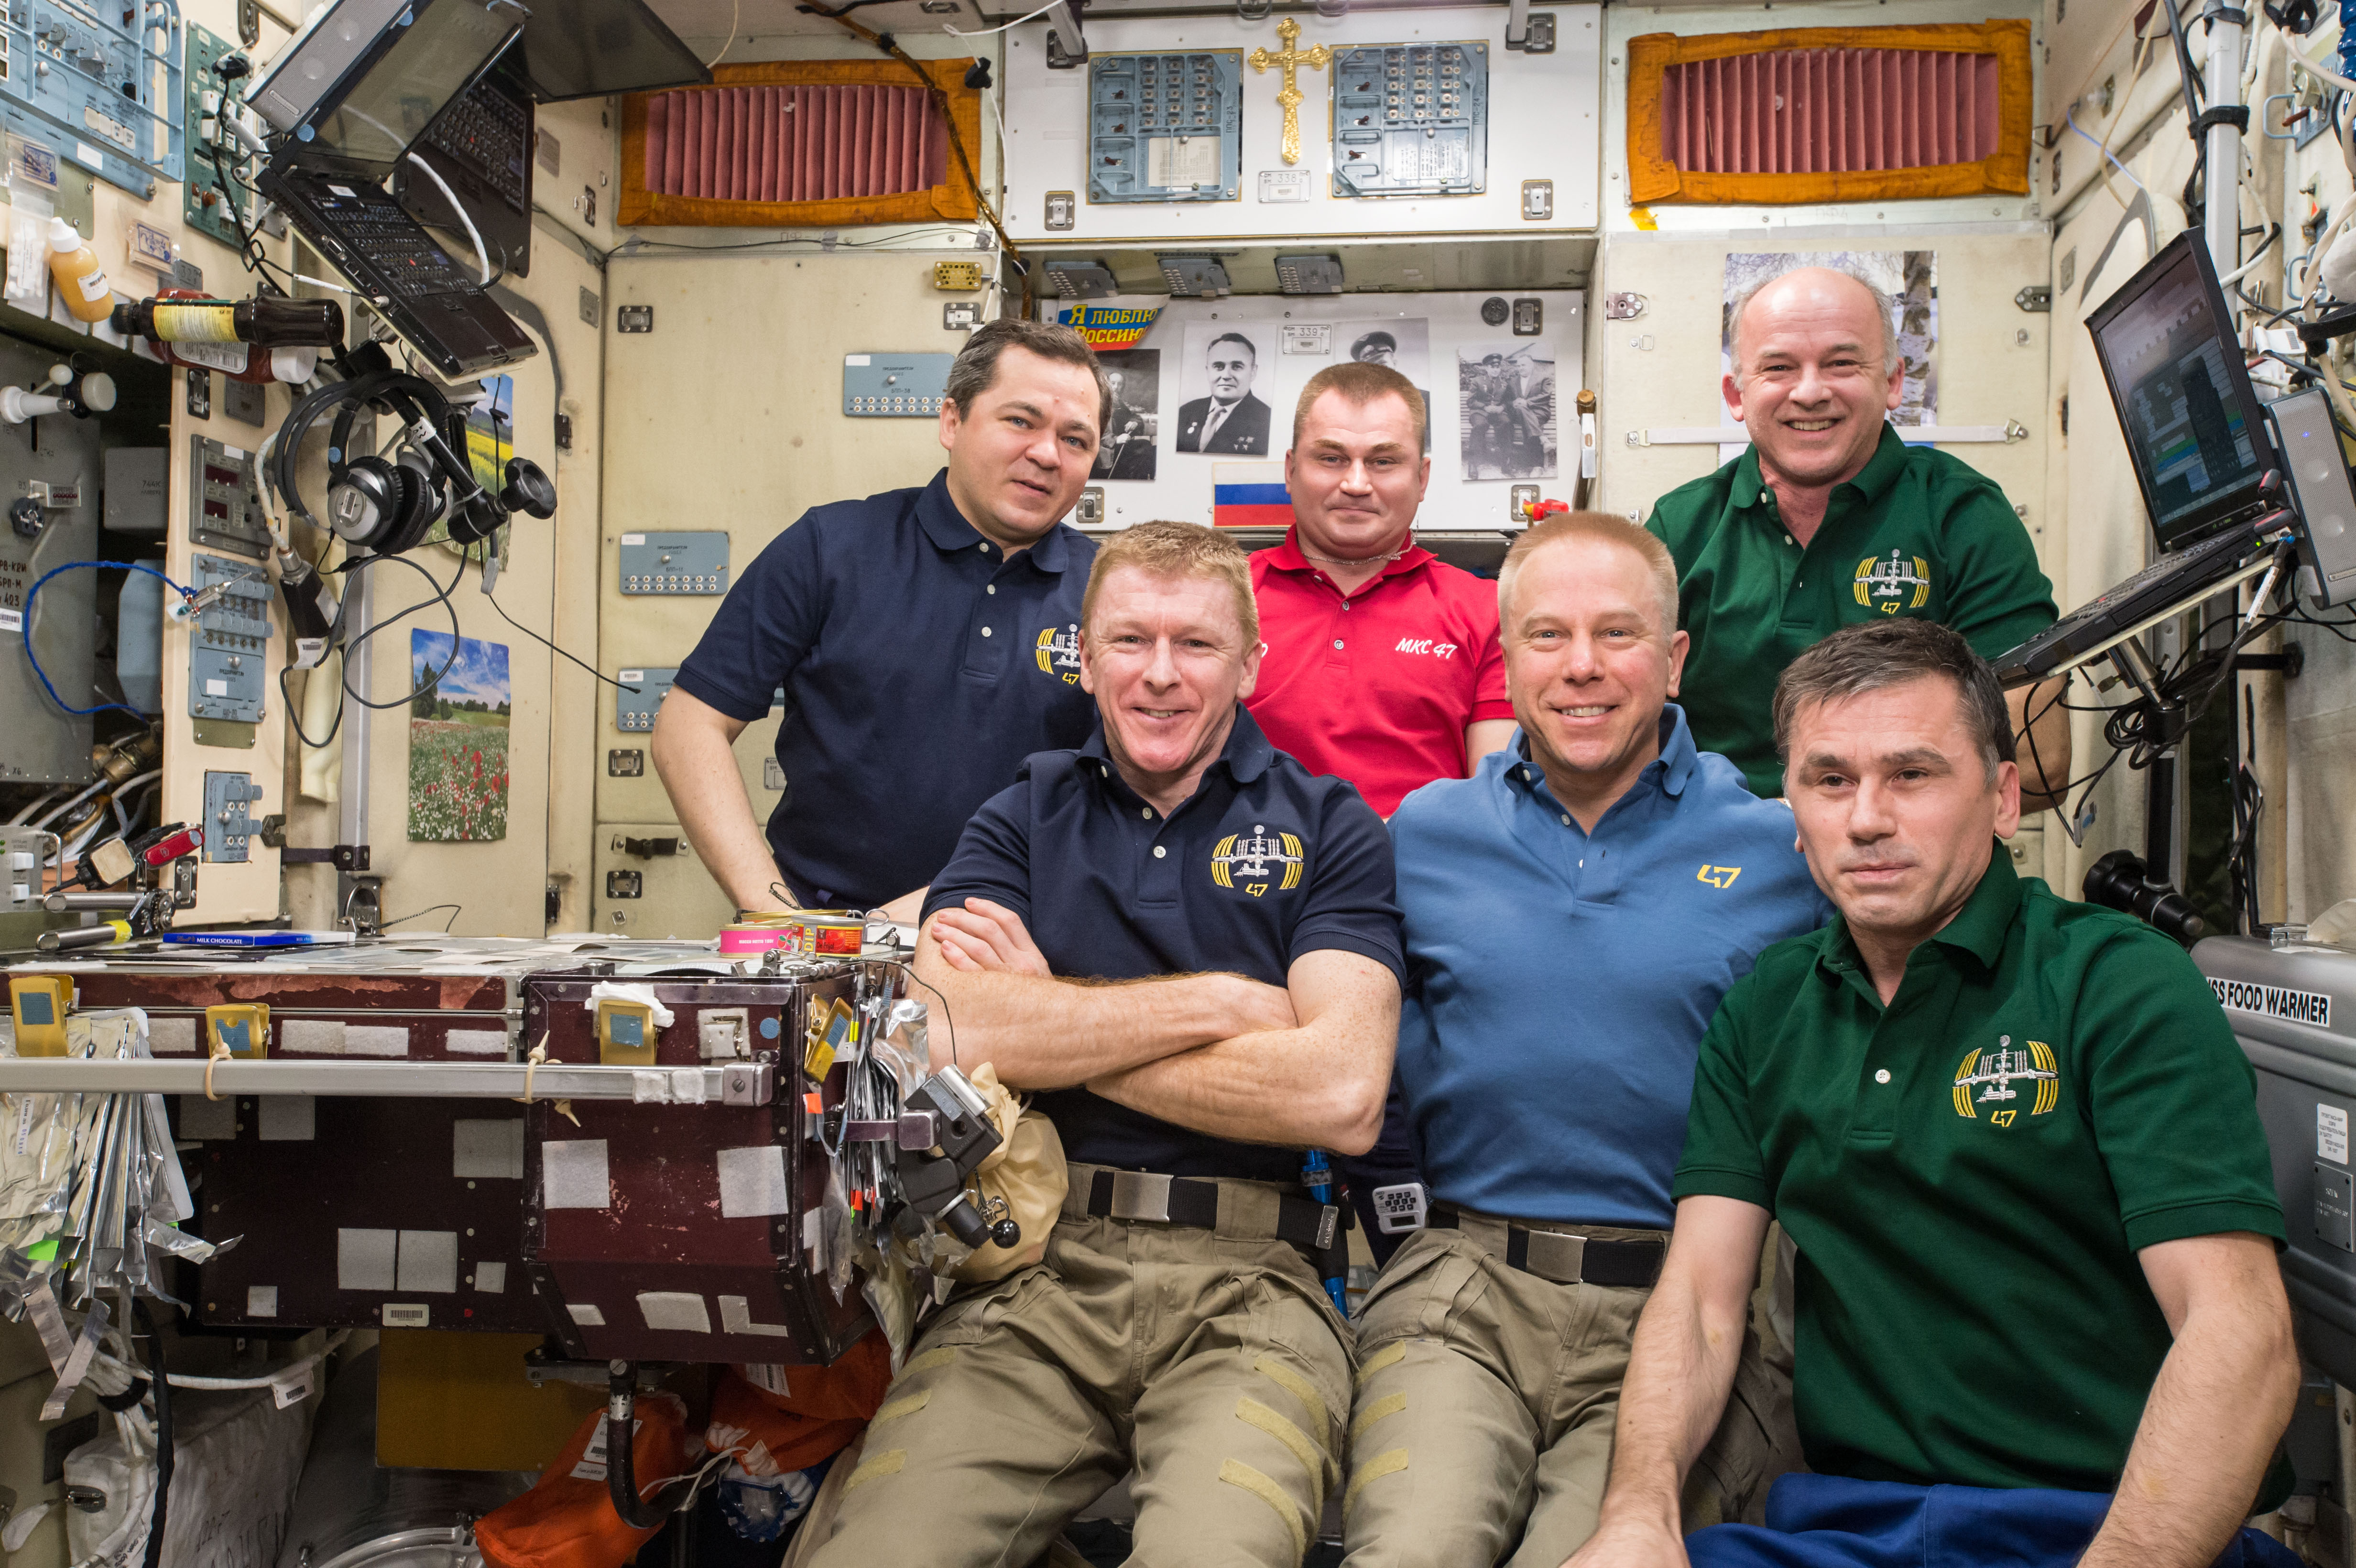 ISS-47 crew poses for the 3 millionth image taken aboard the ISS